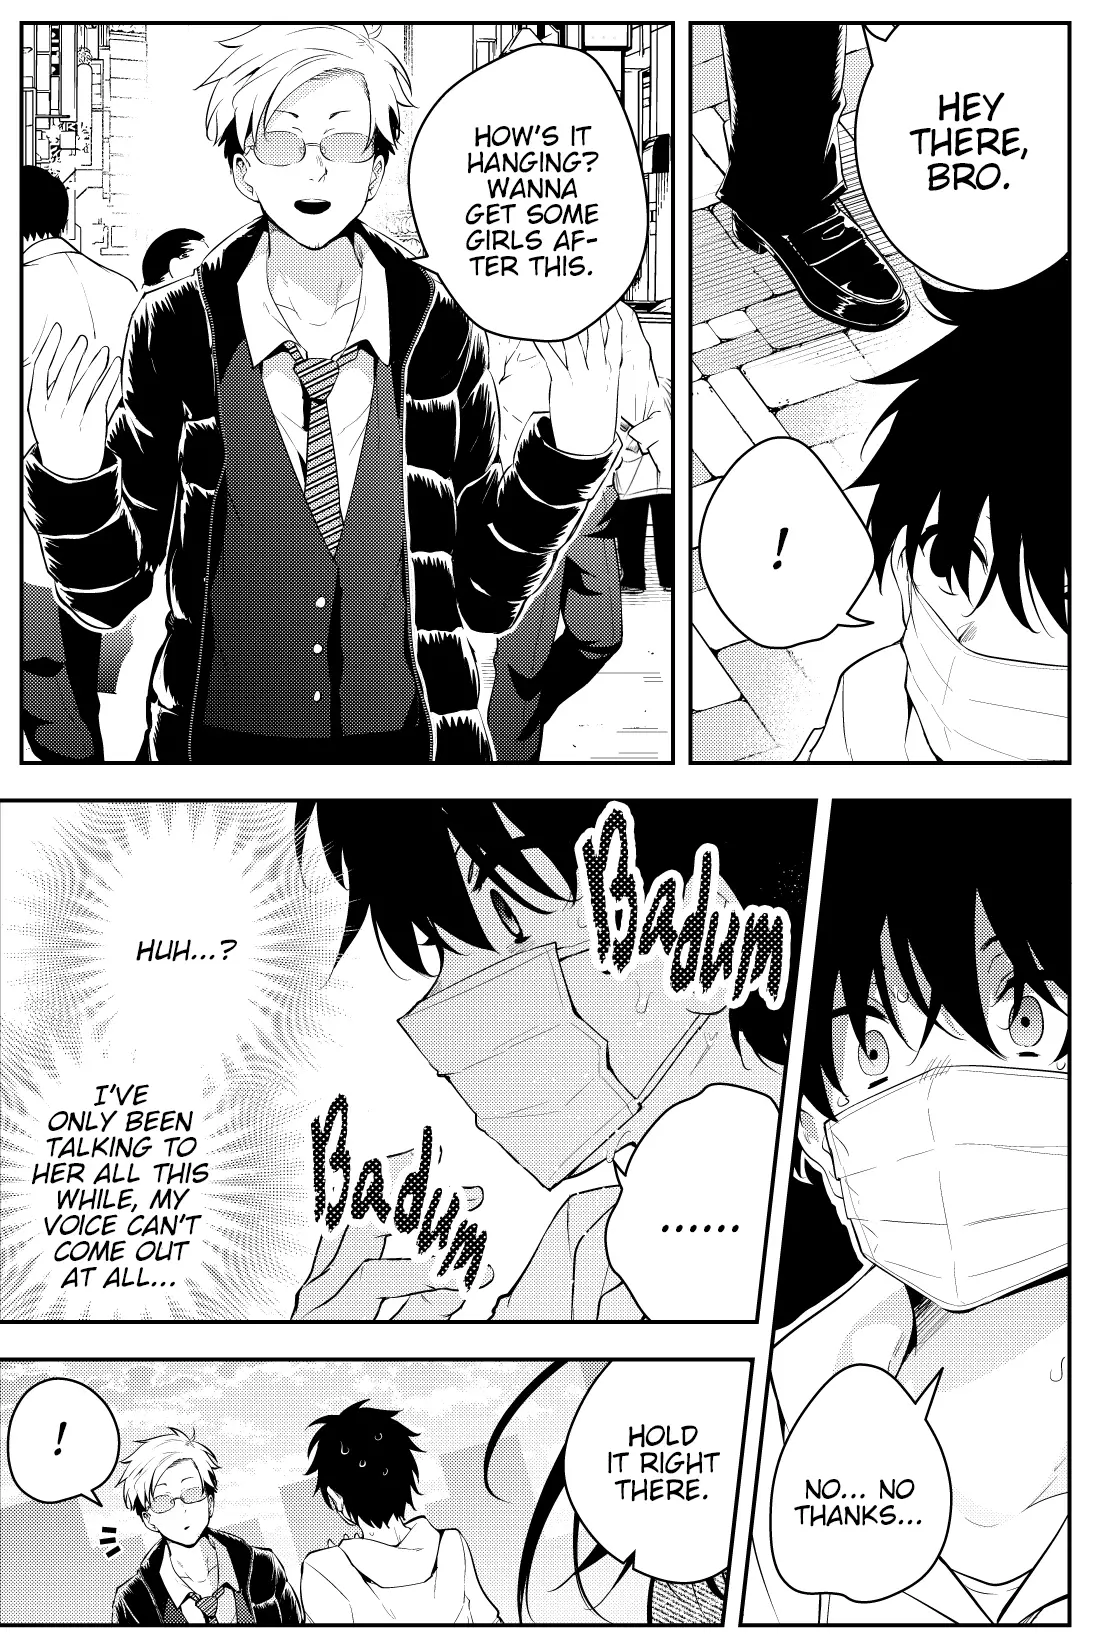 The Story Of A Manga Artist Confined By A Strange High School Girl - 35 page 2-8d84245a